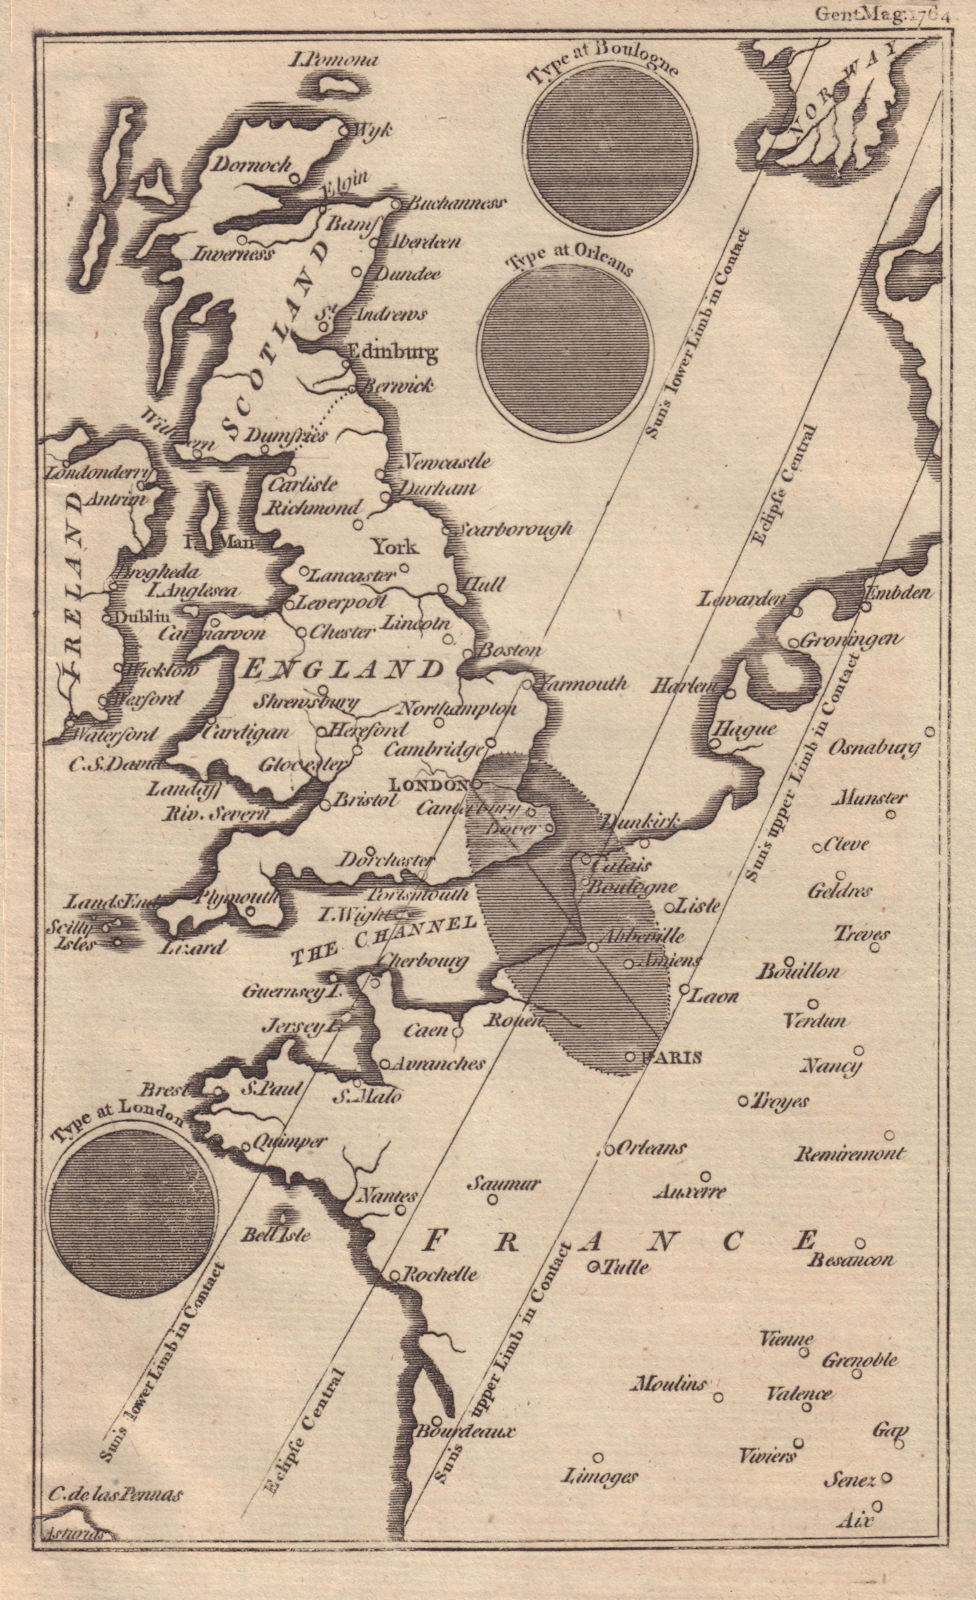 The Solar eclipse of 1 April 1764 across England & France. GENTS MAG 1764 map